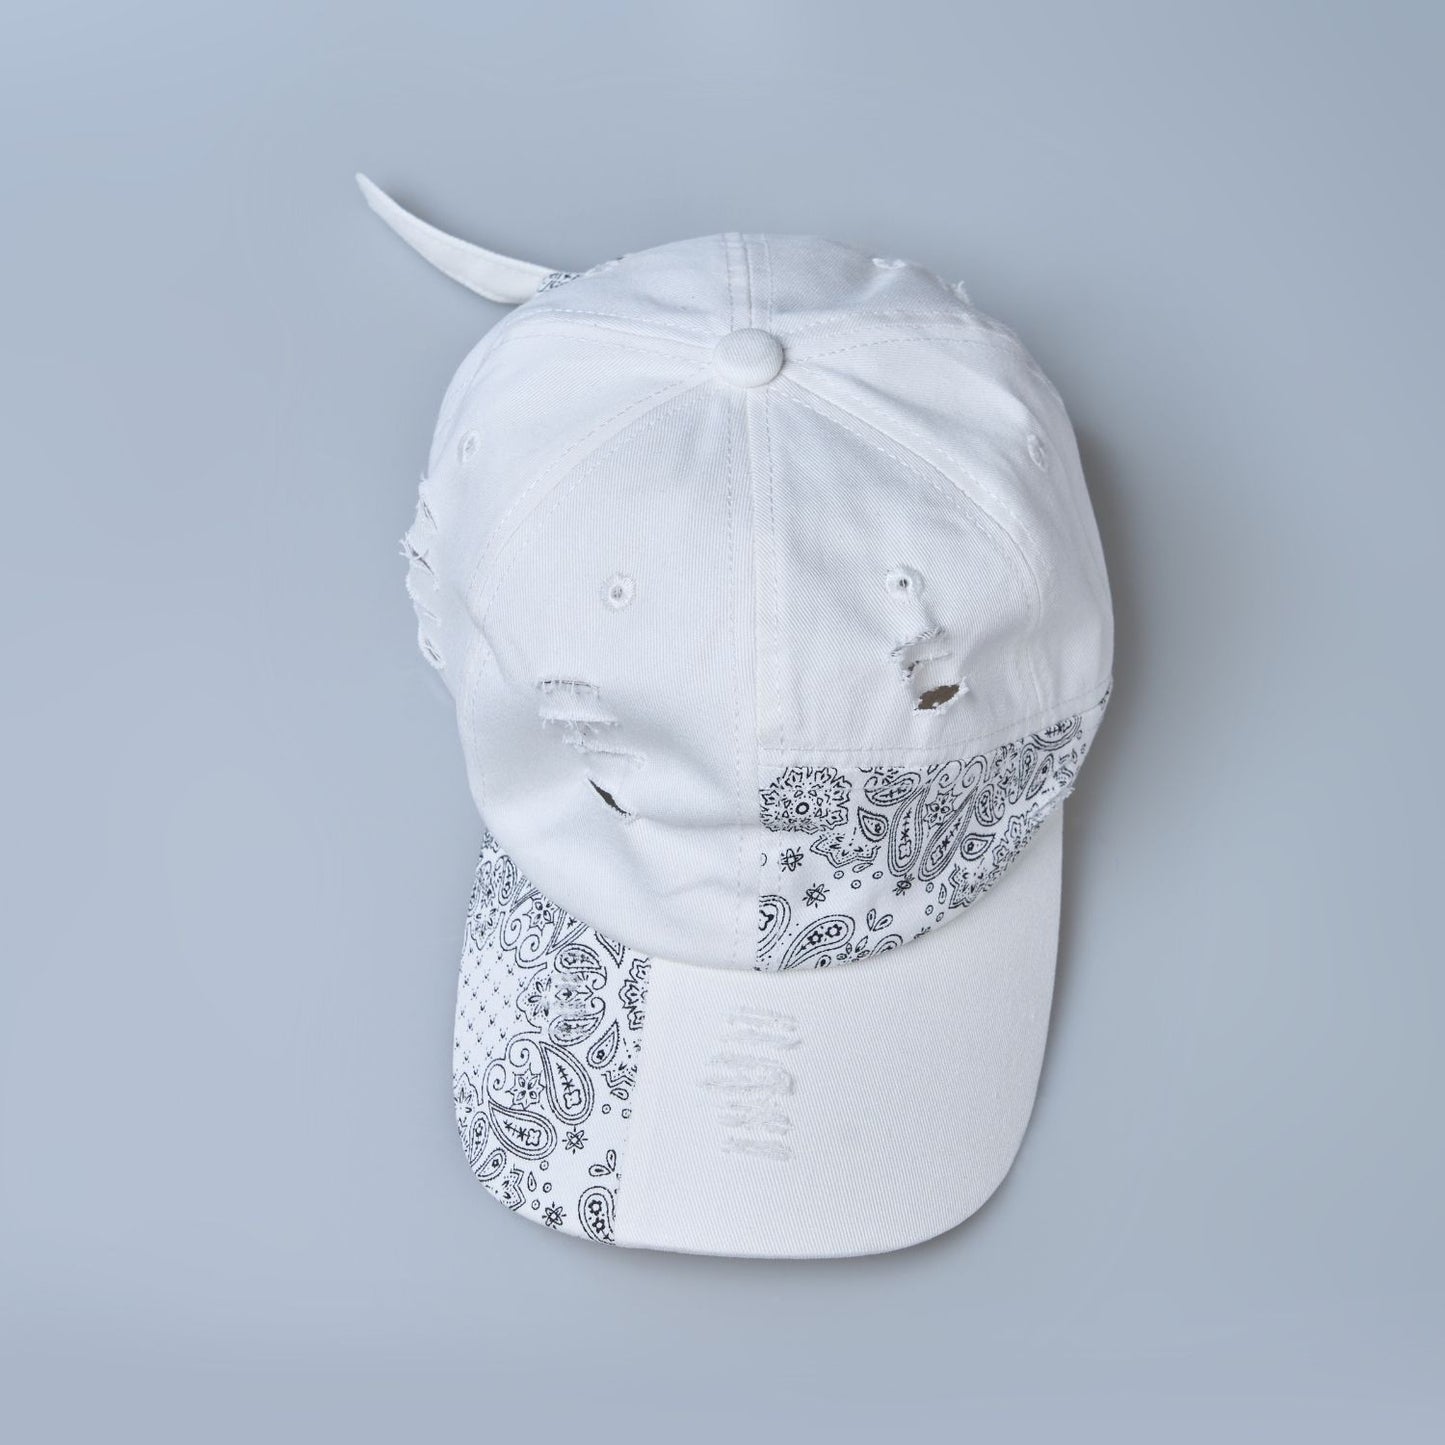 white colored, wide brim designer cap for men with adjustable strap, up view.